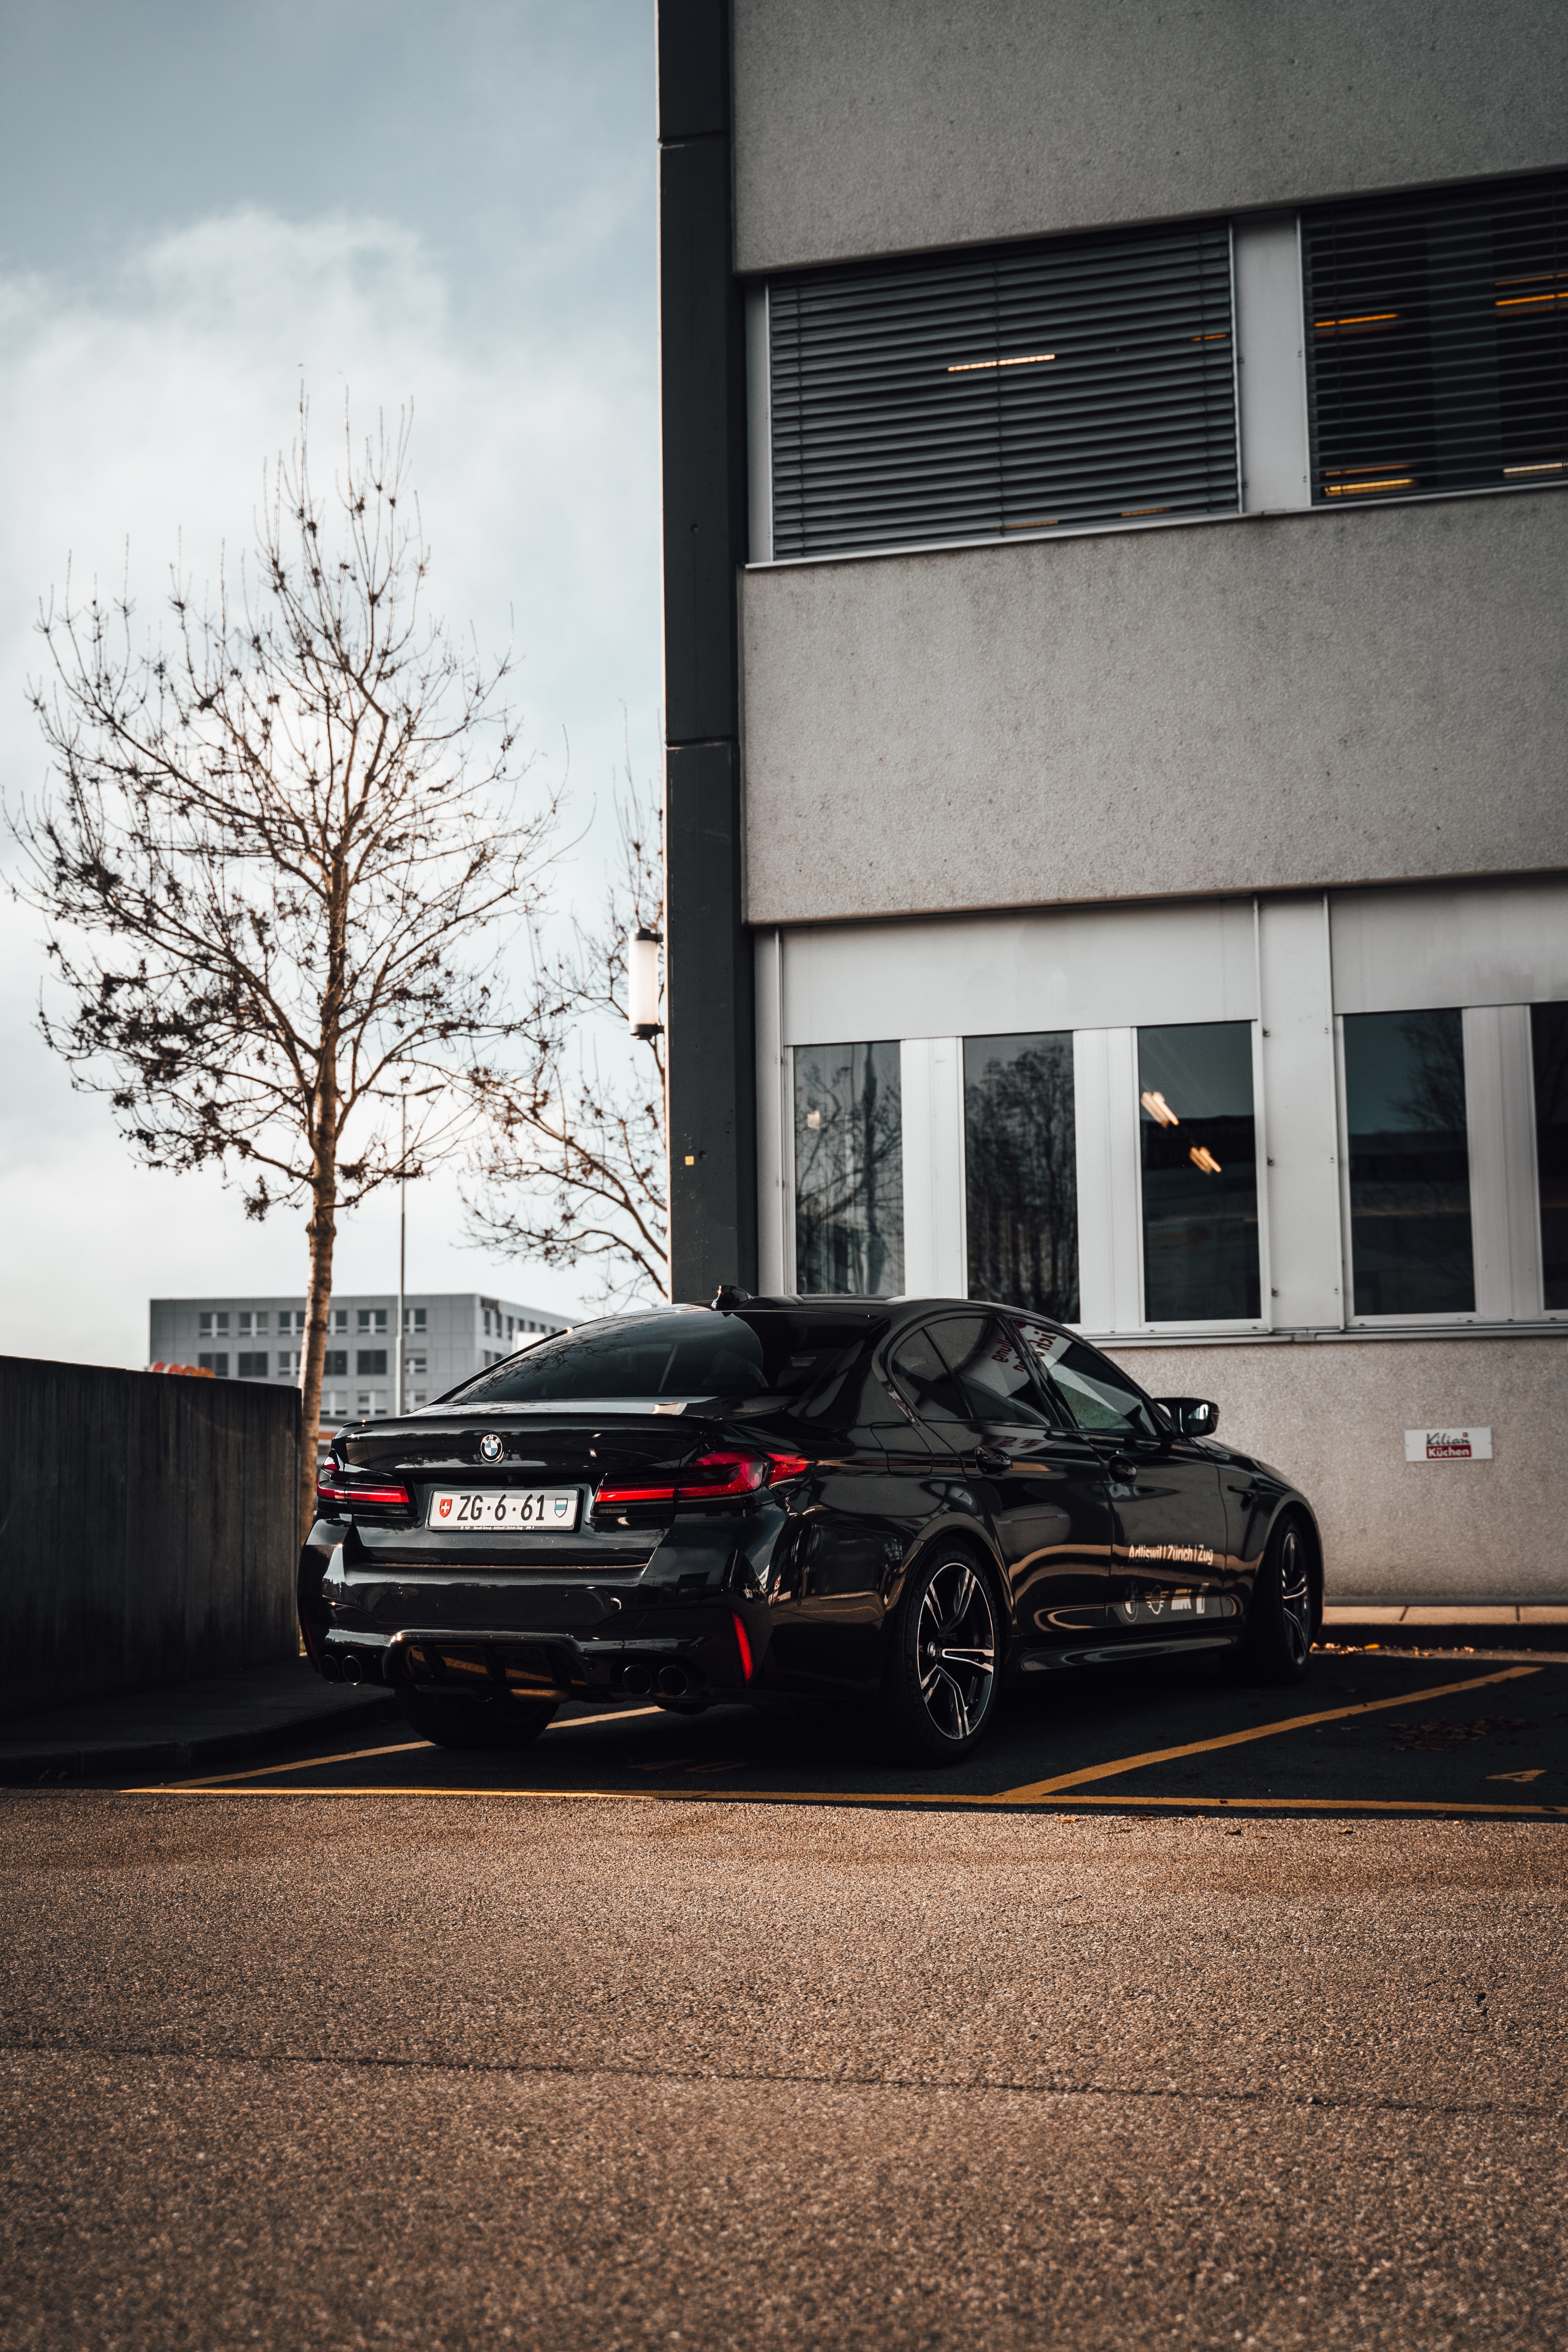 bmw, car, cars, black, side view, parking Aesthetic wallpaper